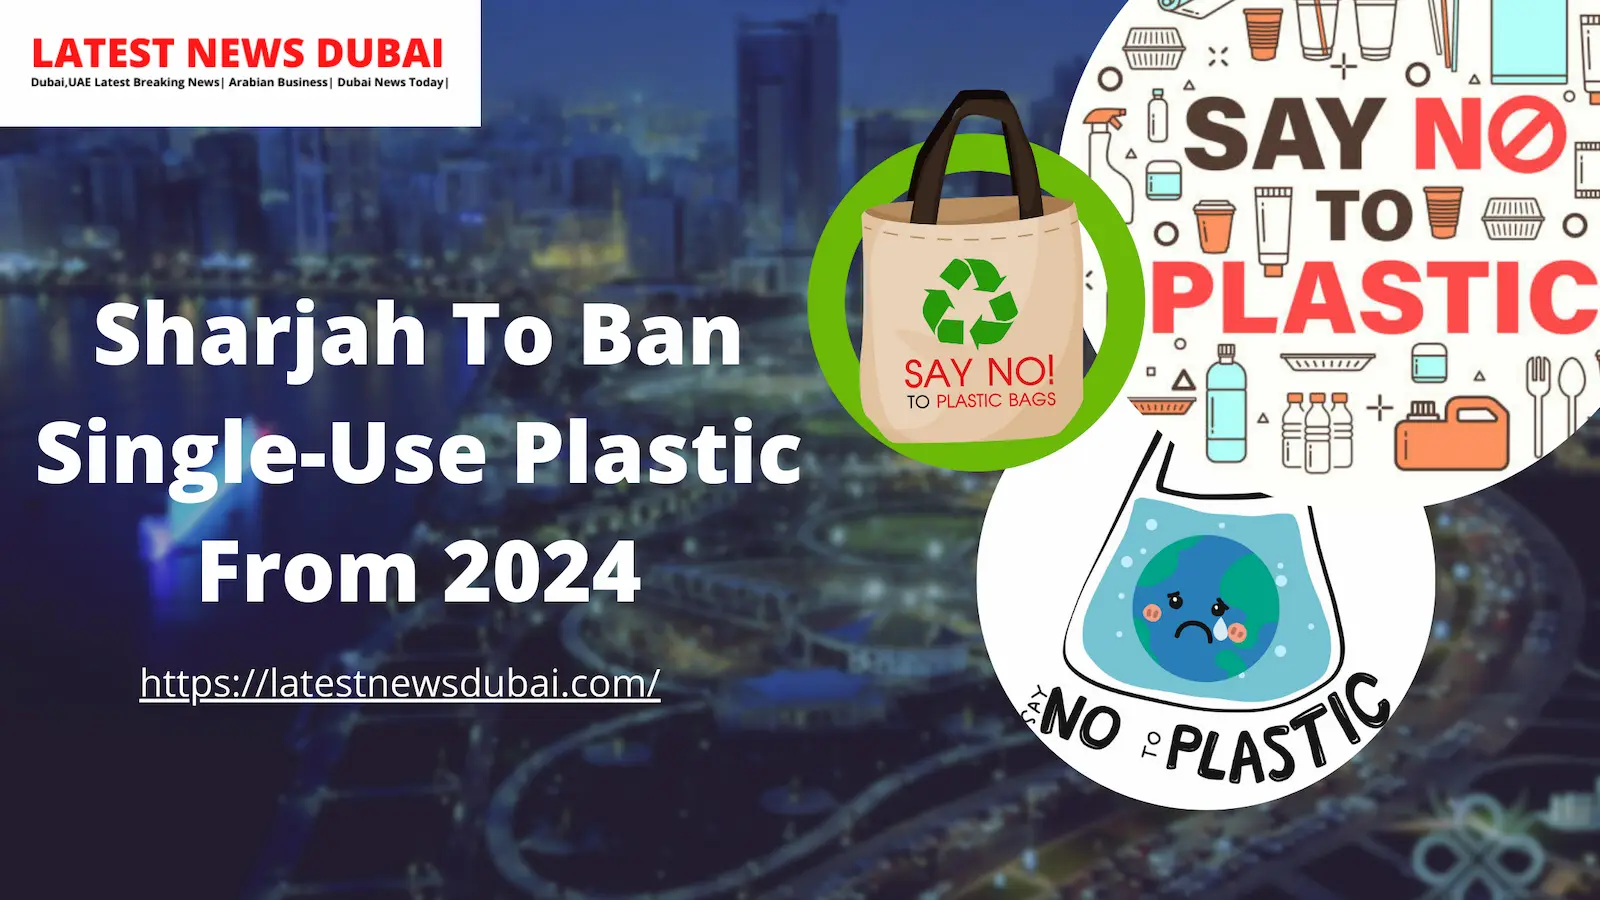 Sharjah To Ban Single Use Plastic From 2024